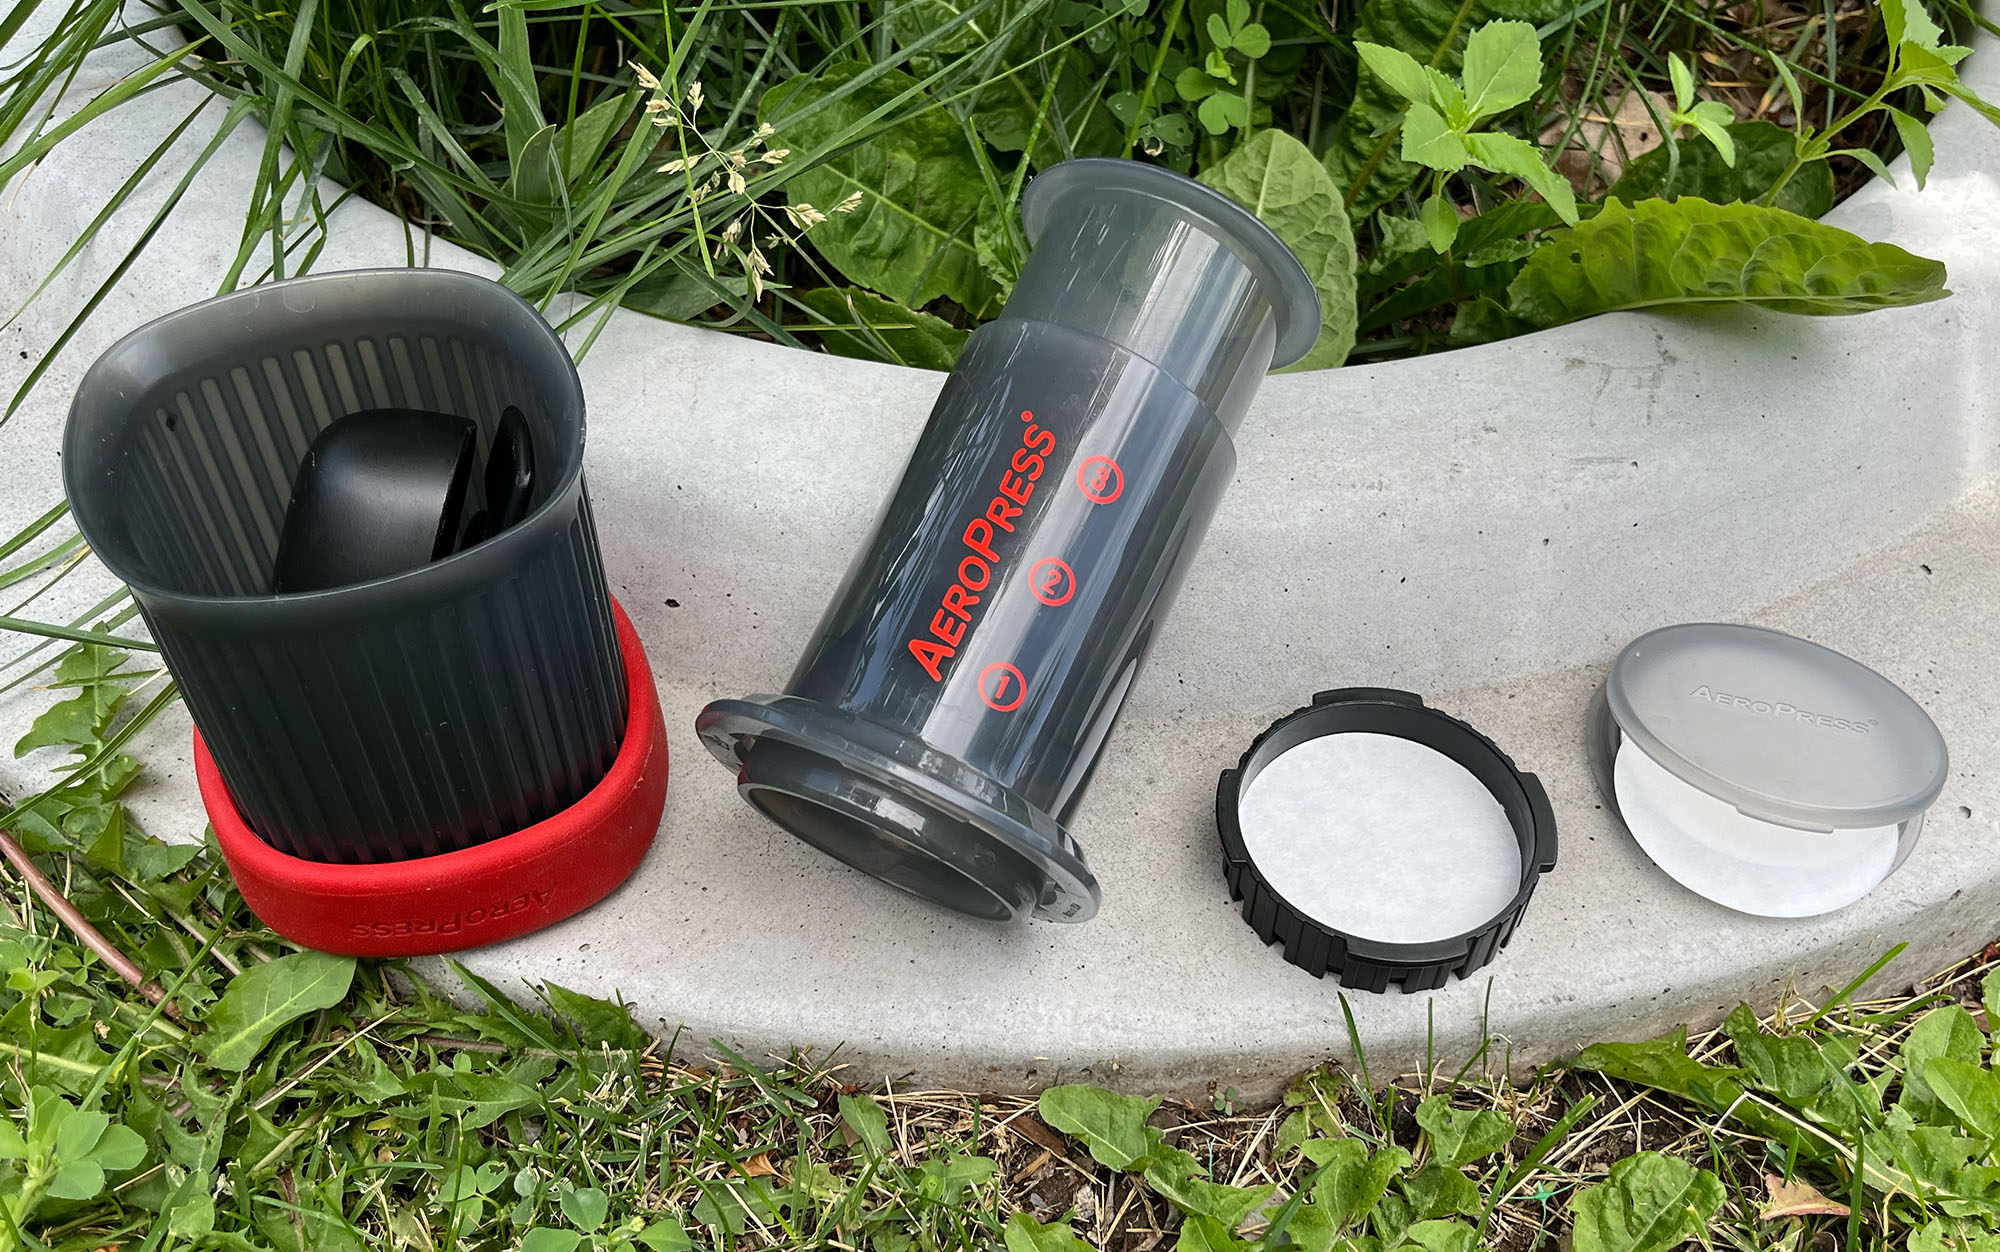 AeroPress includes a ton of compostable filters, but you can place a few in the included carrying container for camping.